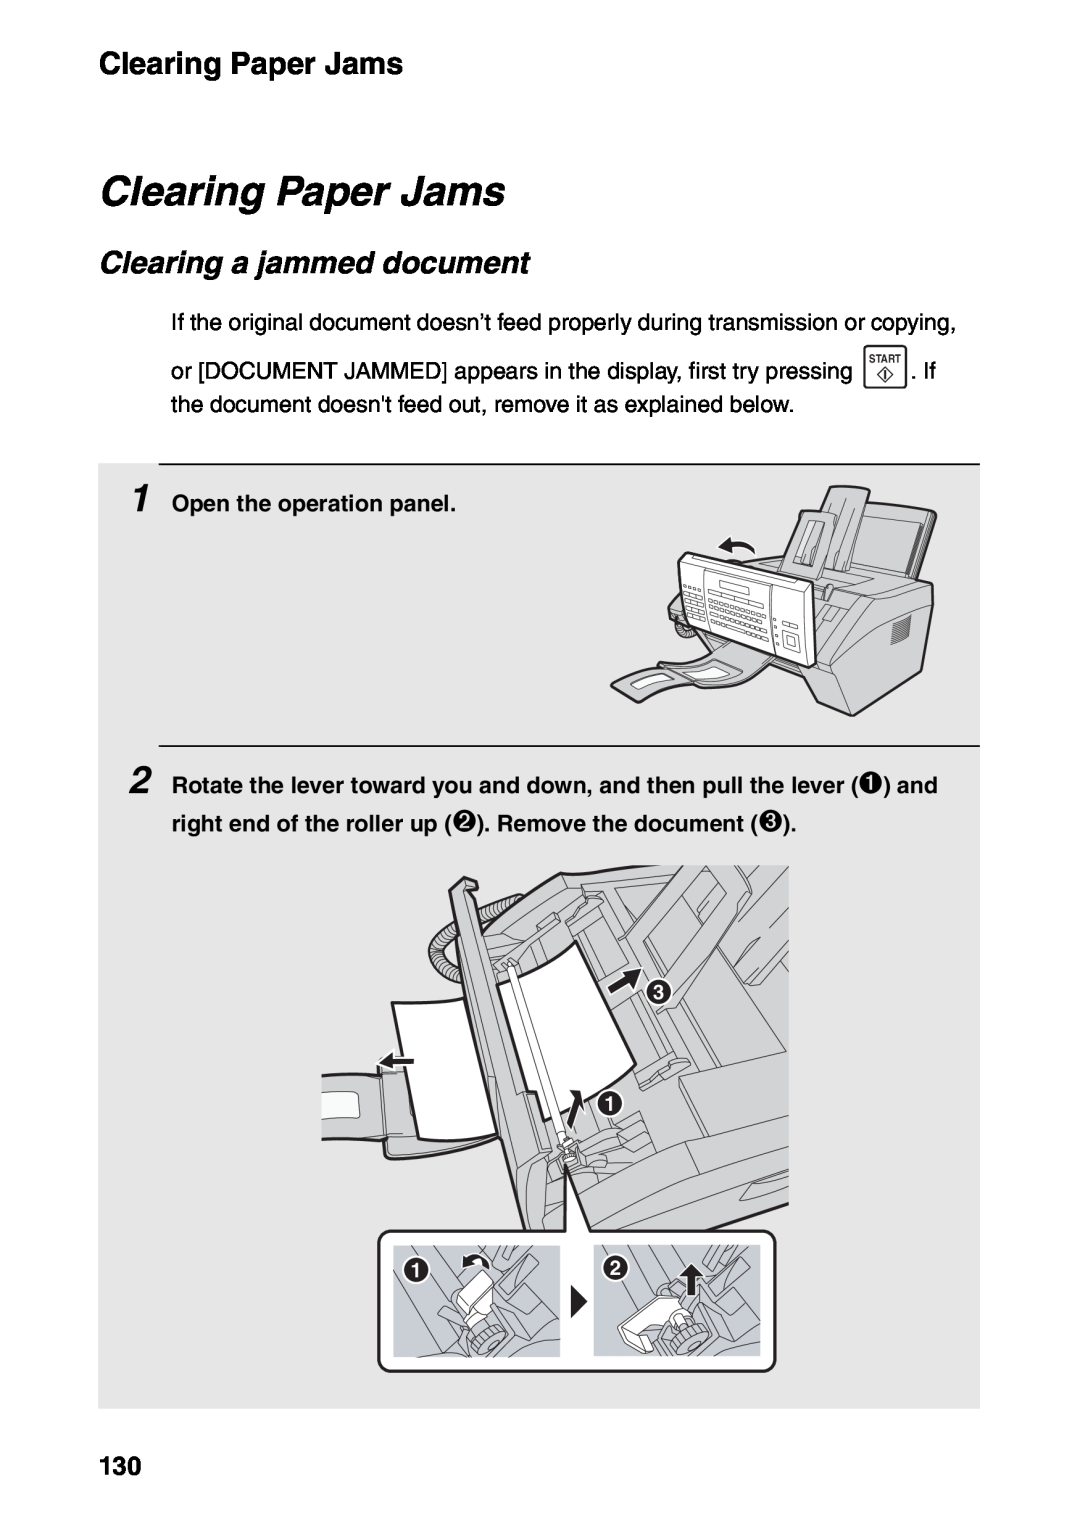 Sharp FO-IS115N operation manual Clearing Paper Jams, Clearing a jammed document 